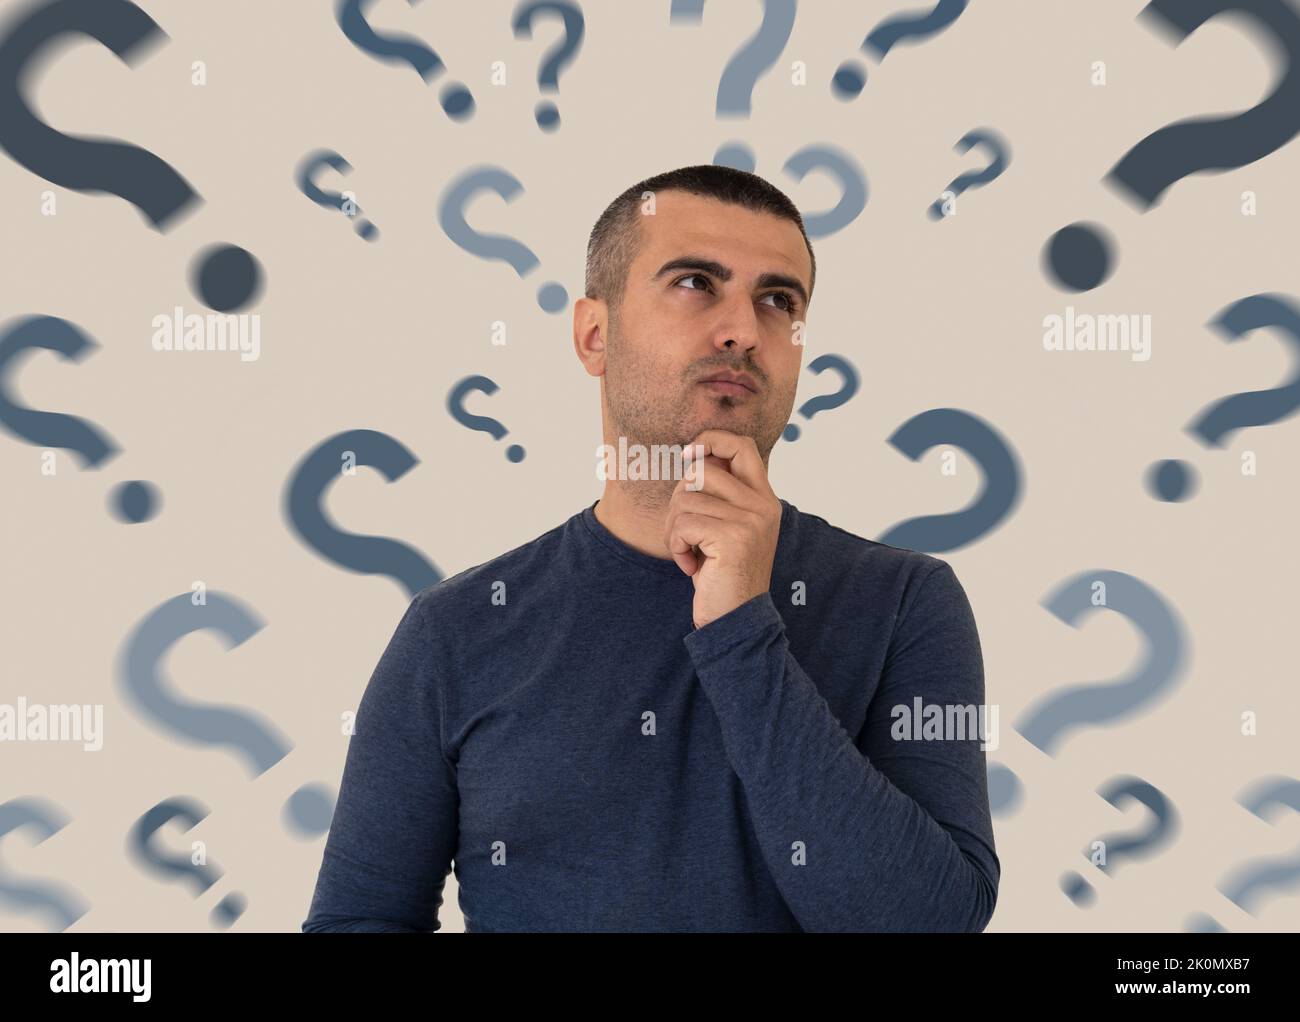 Close up photo of pensive and thoughtful man with the question marks on the backround. Concept of FAQ and mindblowing to find answer to questions. Stock Photo